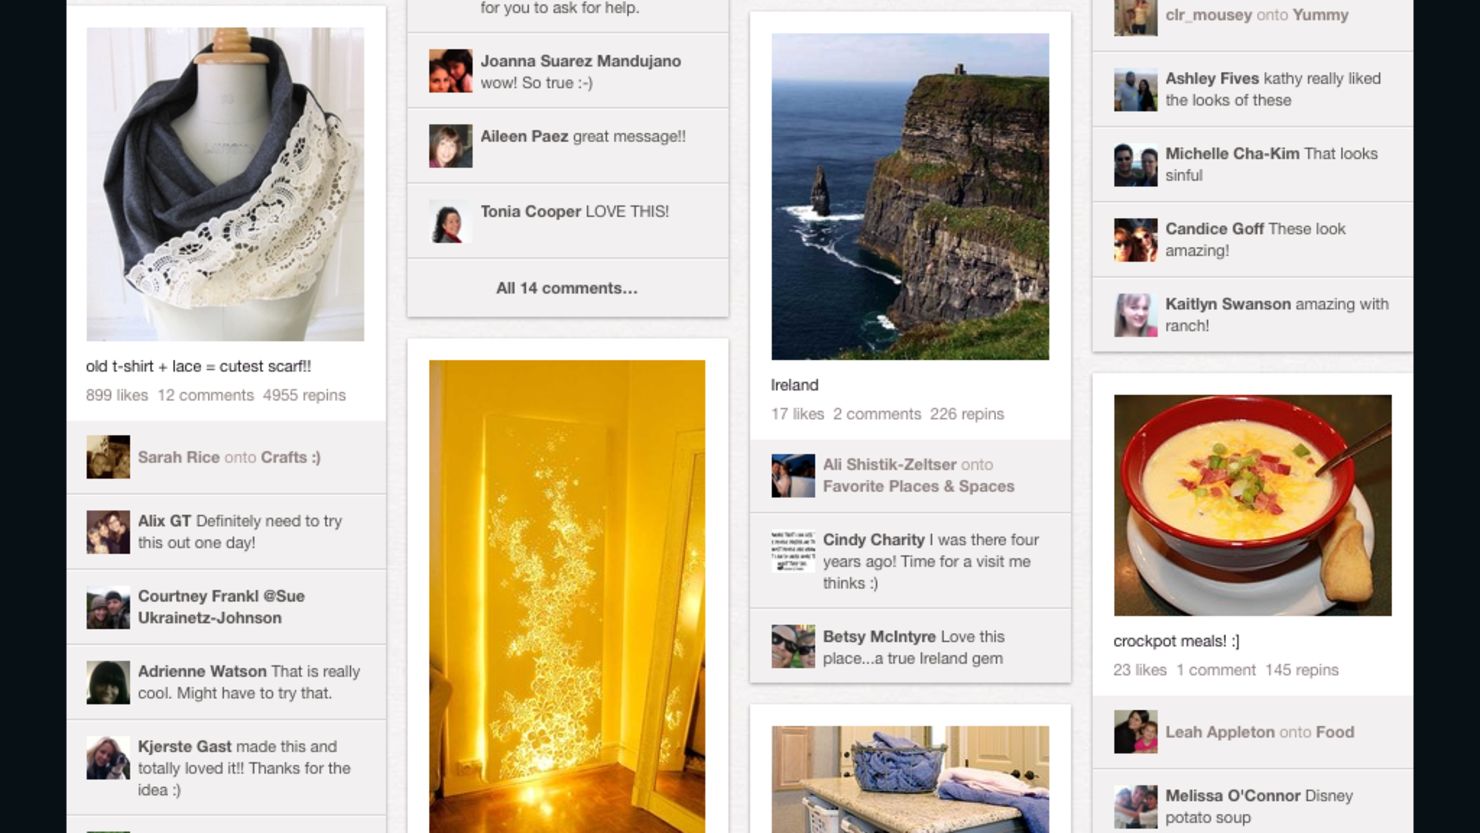 Pinterest, the web-based "pinboard", which launched almost two years ago, barely got a mention until 6 months ago.